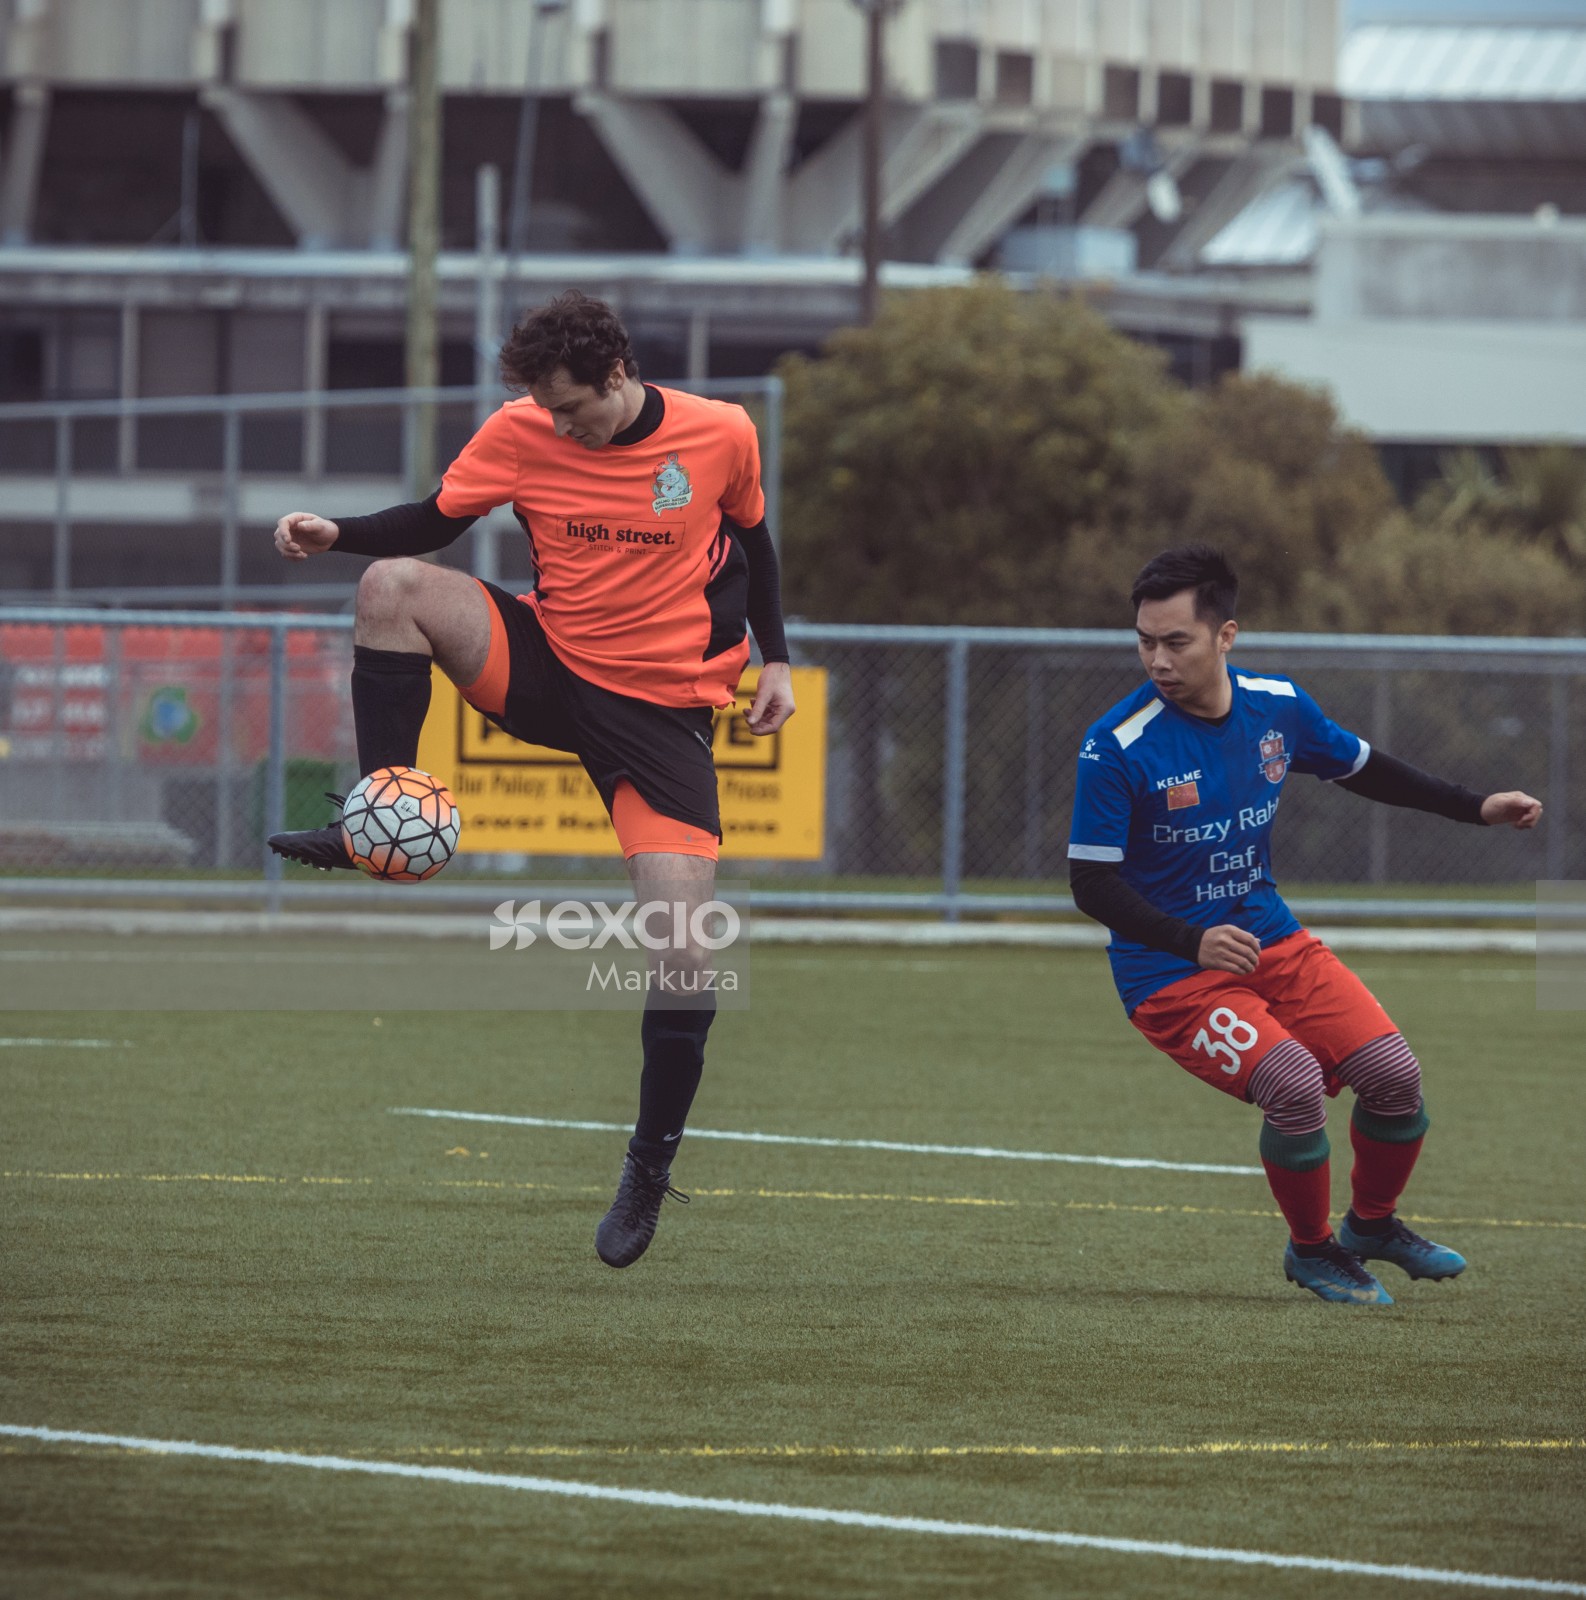 Player in orange shirt reigns football midair - Sports Zone sunday league